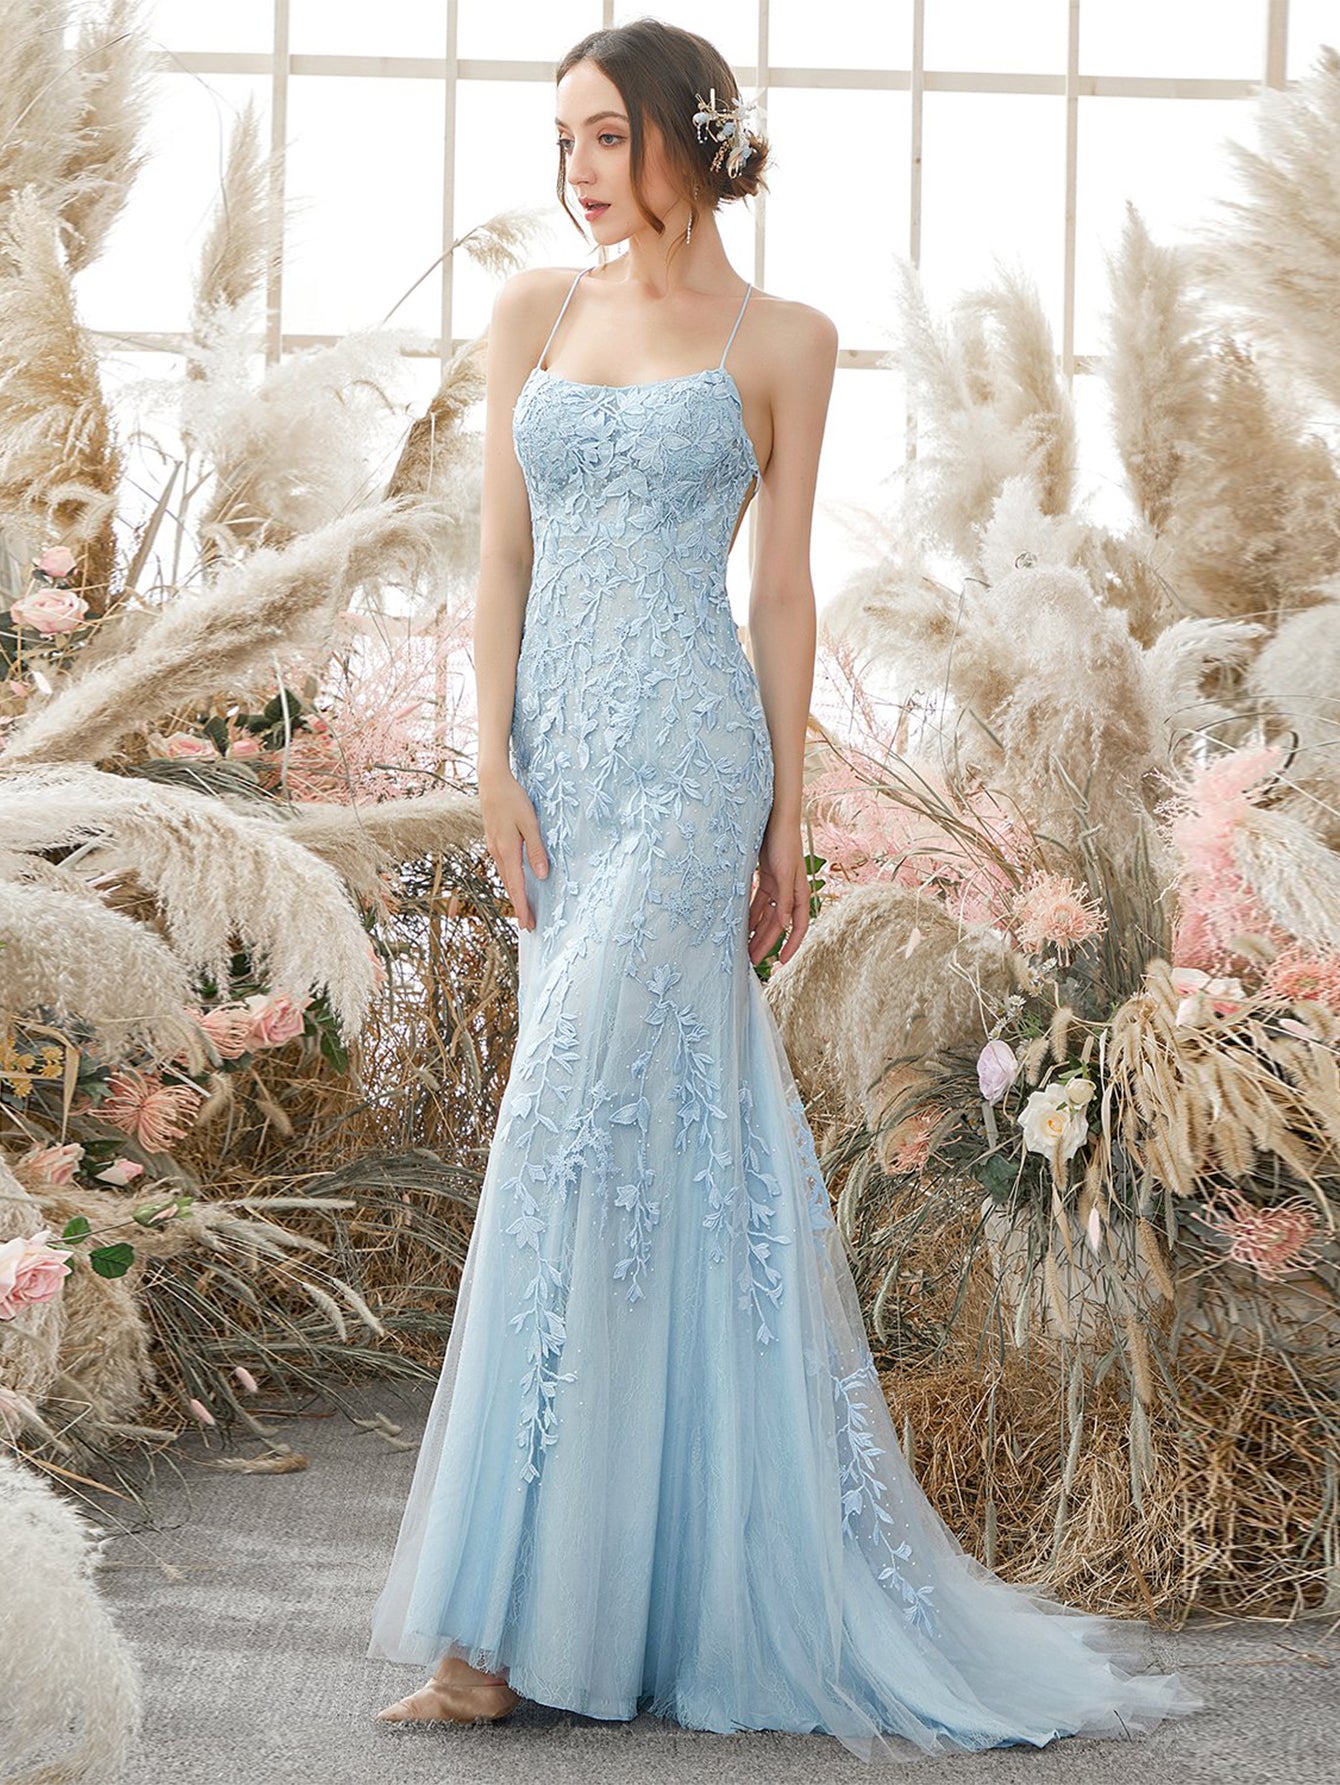 vigocouture Shimmering Light Blue Sequin Mermaid Prom Dress with Spaghetti Strap and Corset Back 22229 Black / US4